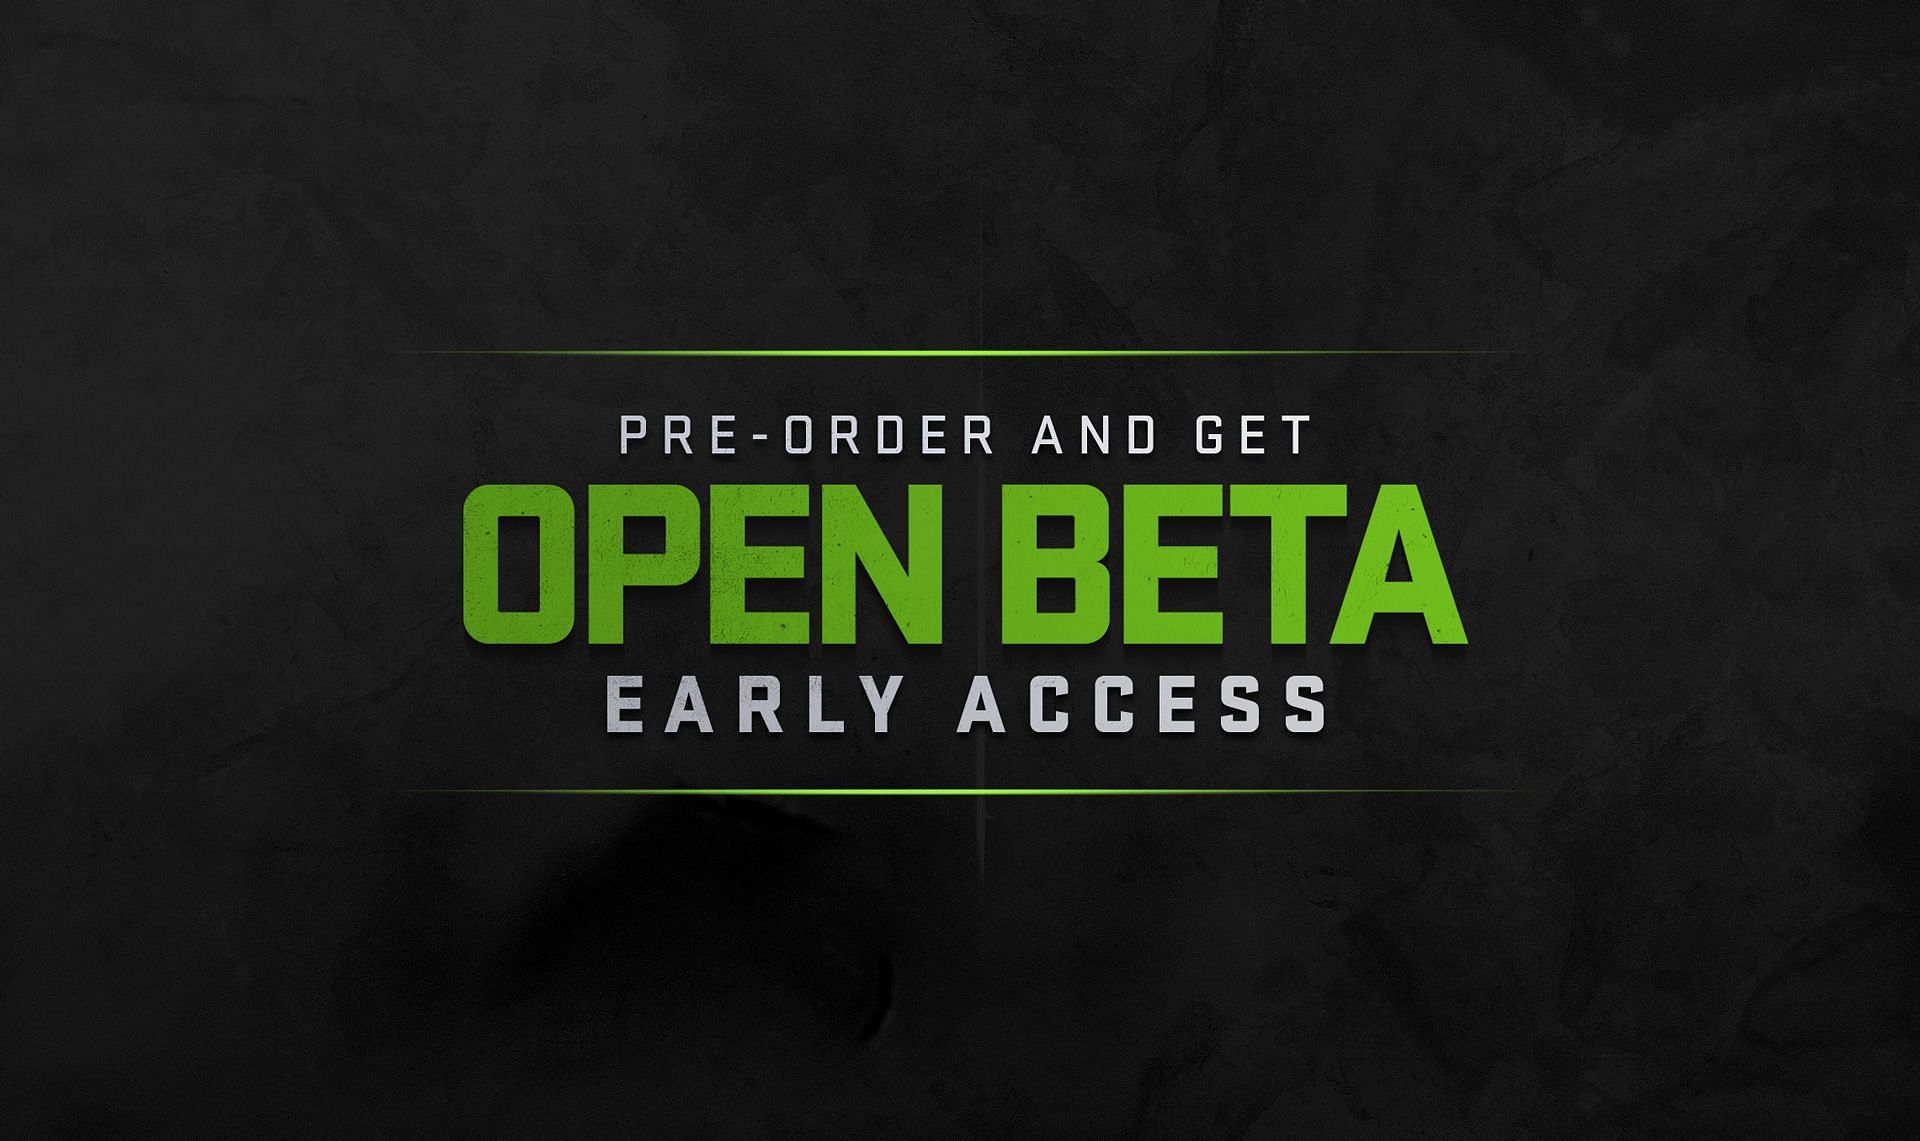 Open Beta early access for pre-ordering all digital versions (image via Activision)